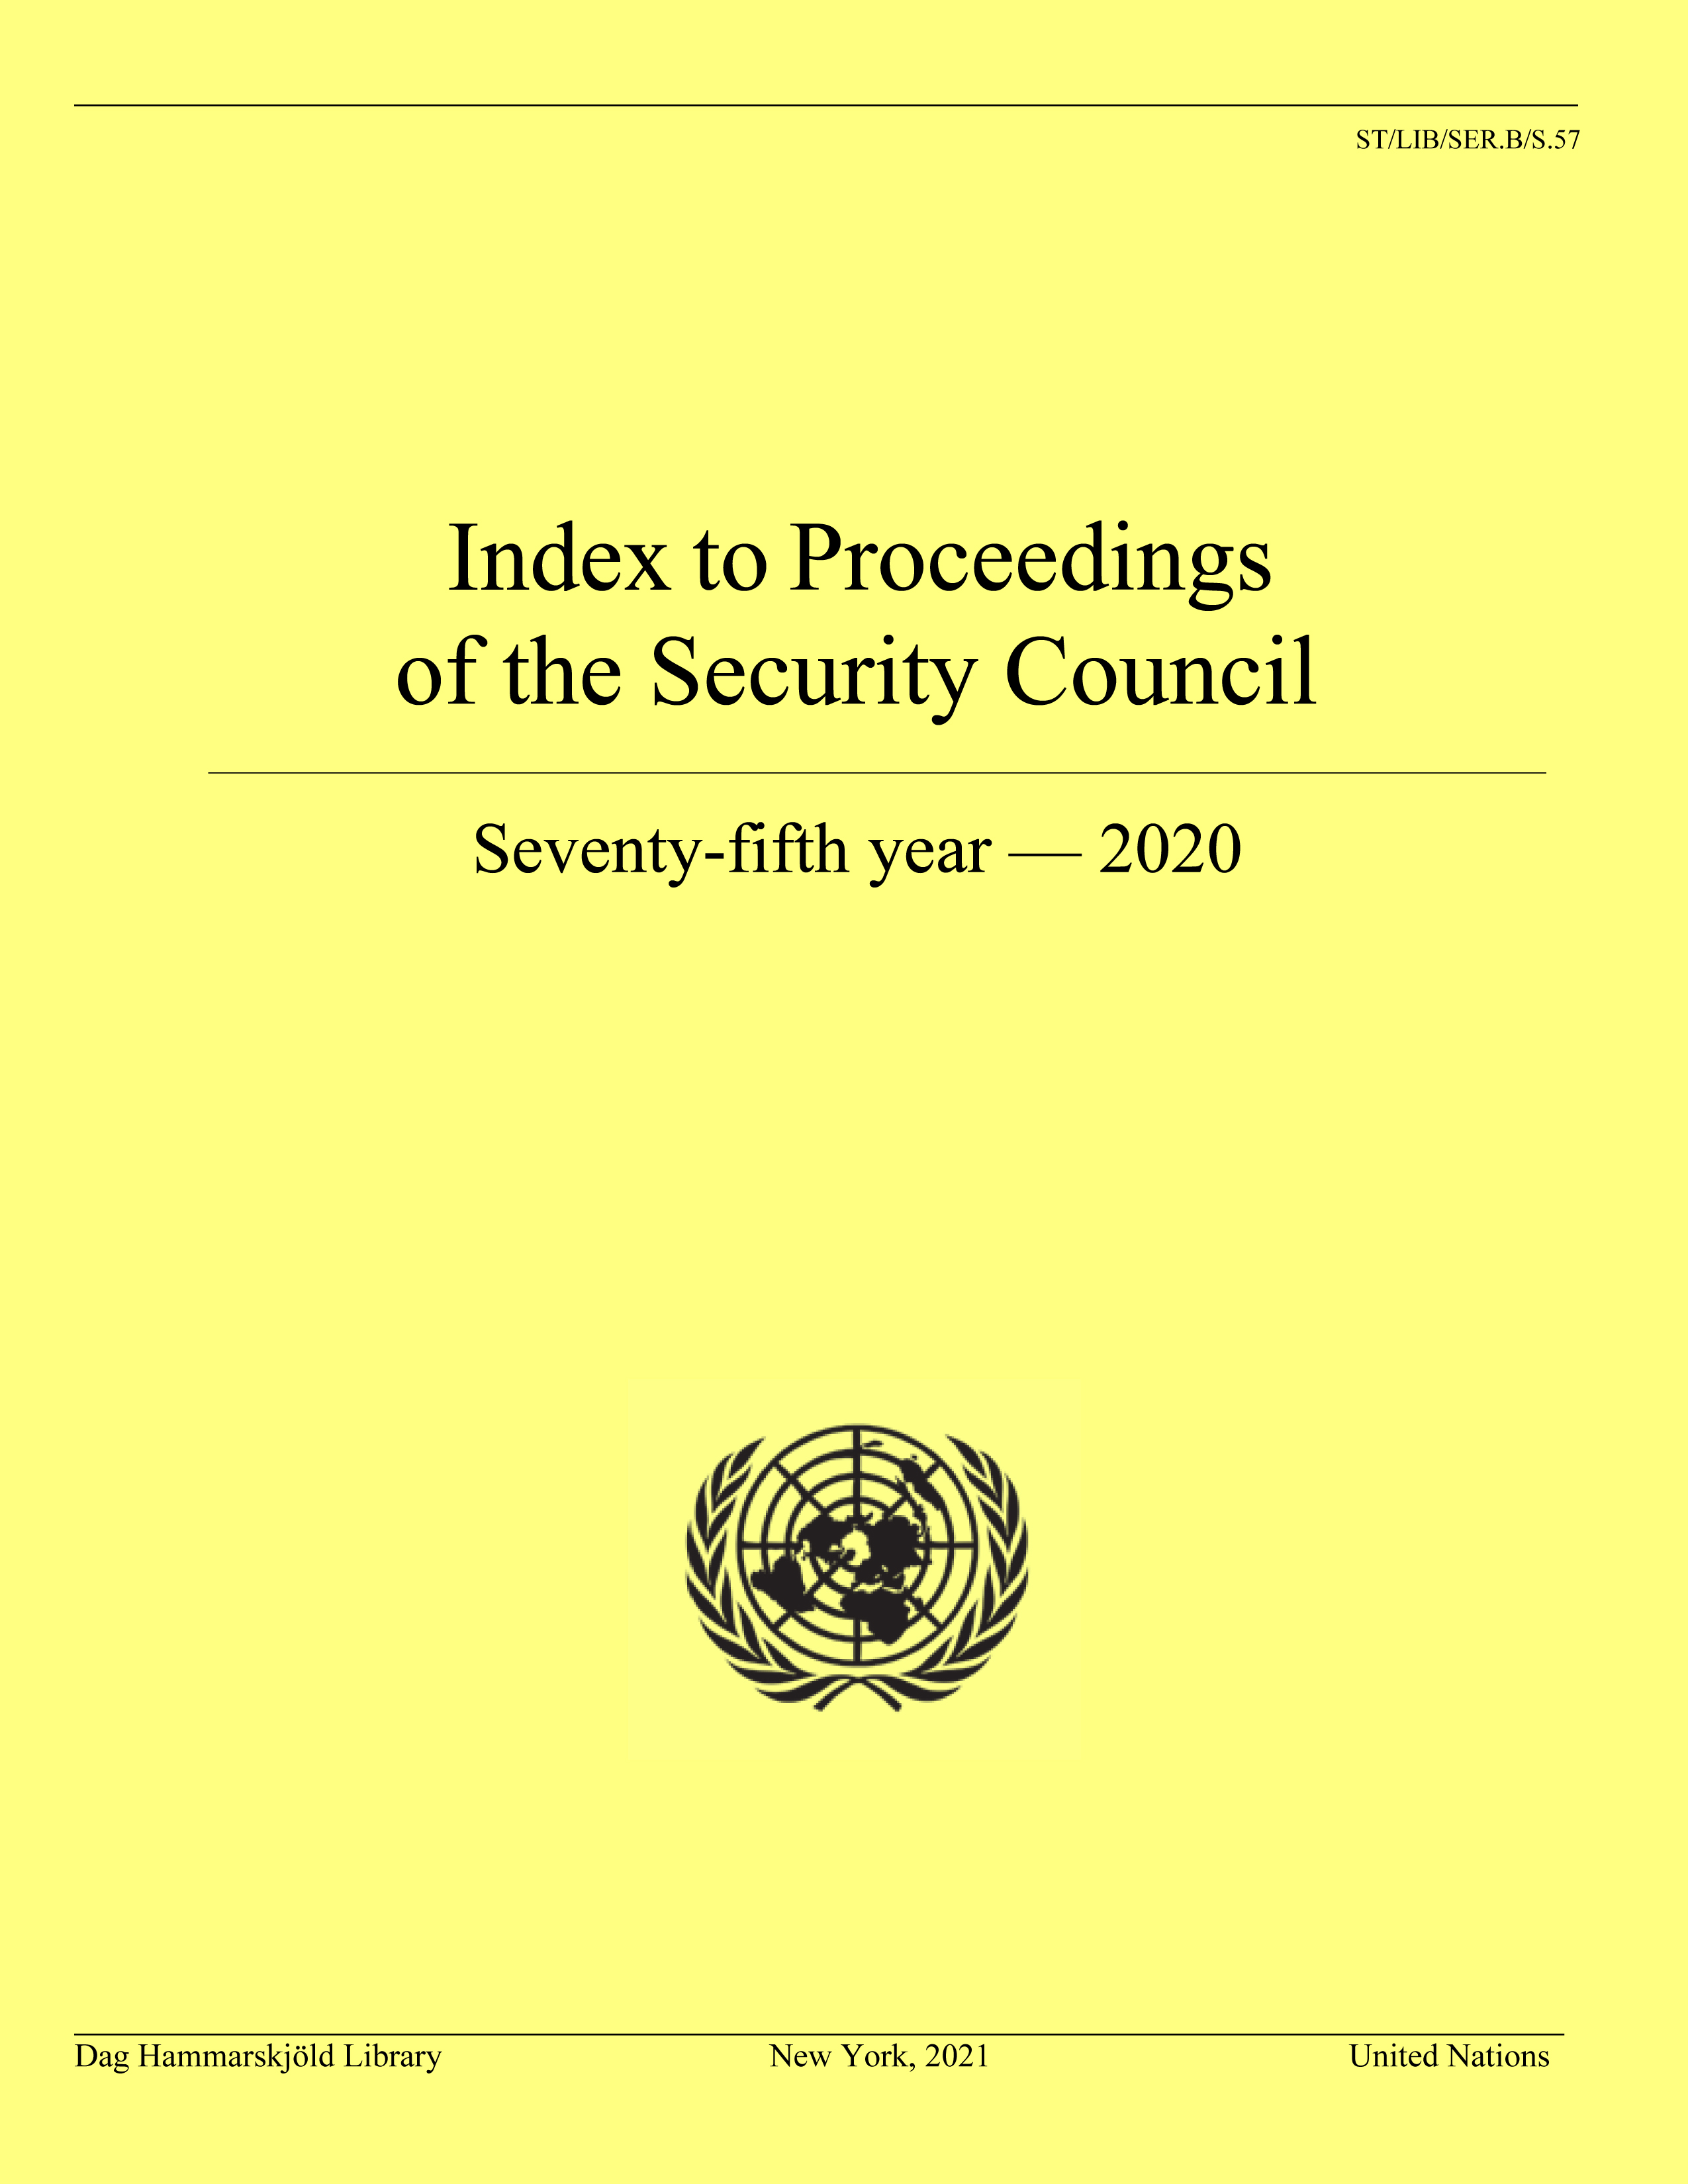 image of Index to Proceedings of the Security Council: Seventy-fifth Year, 2020